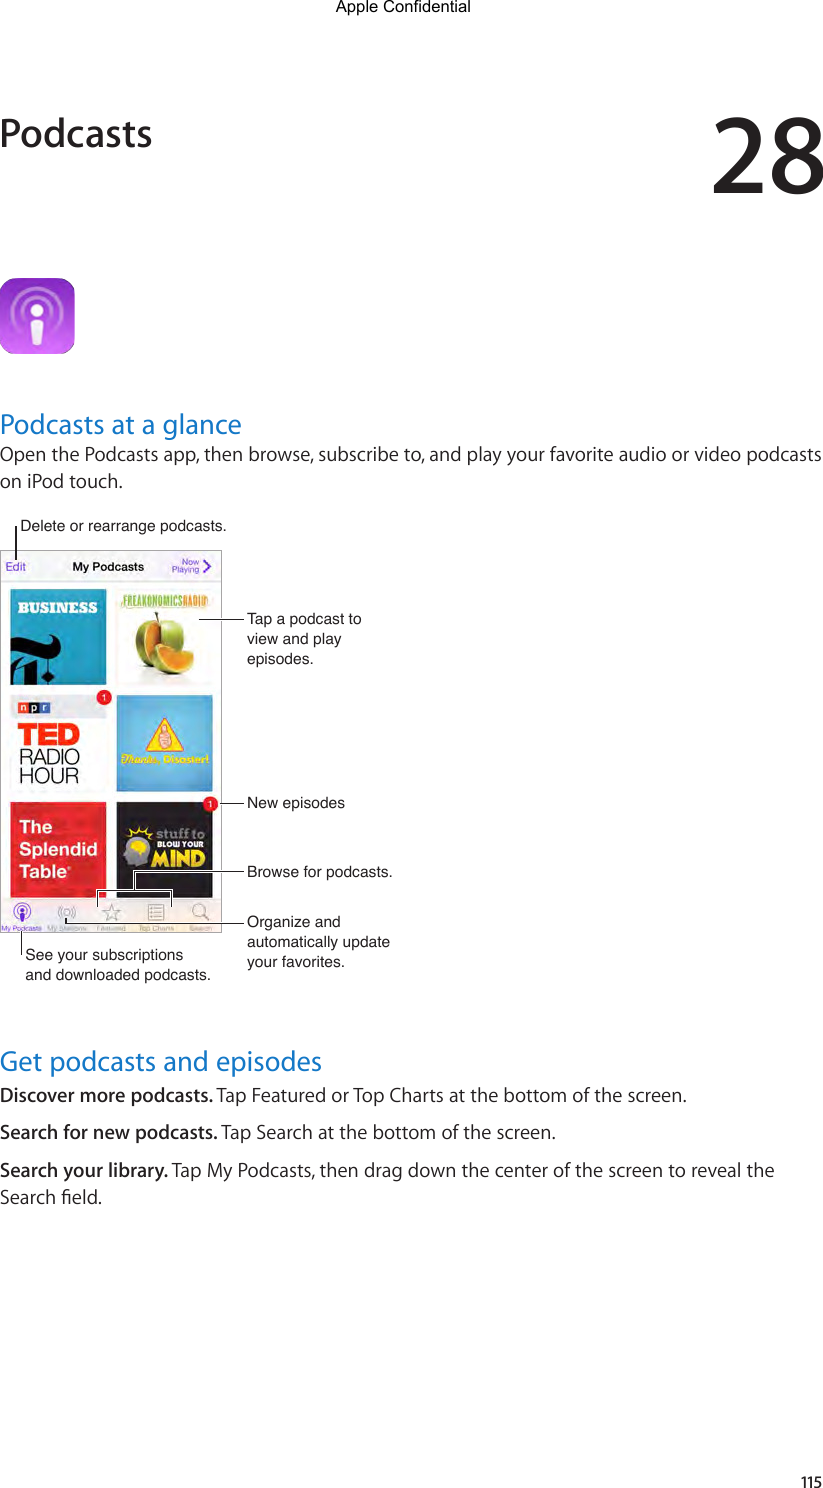 28115Podcasts at a glanceOpen the Podcasts app, then browse, subscribe to, and play your favorite audio or video podcasts on iPod touch.See your subscriptionsand downloaded podcasts.See your subscriptionsand downloaded podcasts.Delete or rearrange podcasts. Delete or rearrange podcasts. Tap a podcast to view and play episodes.Tap a podcast to view and play episodes.Organize and automatically update your favorites.Organize and automatically update your favorites.Browse for podcasts.Browse for podcasts.New episodesNew episodesGet podcasts and episodesDiscover more podcasts. Tap Featured or Top Charts at the bottom of the screen.Search for new podcasts. Tap Search at the bottom of the screen.Search your library. Tap My Podcasts, then drag down the center of the screen to reveal the Searcheld.PodcastsApple Confidential